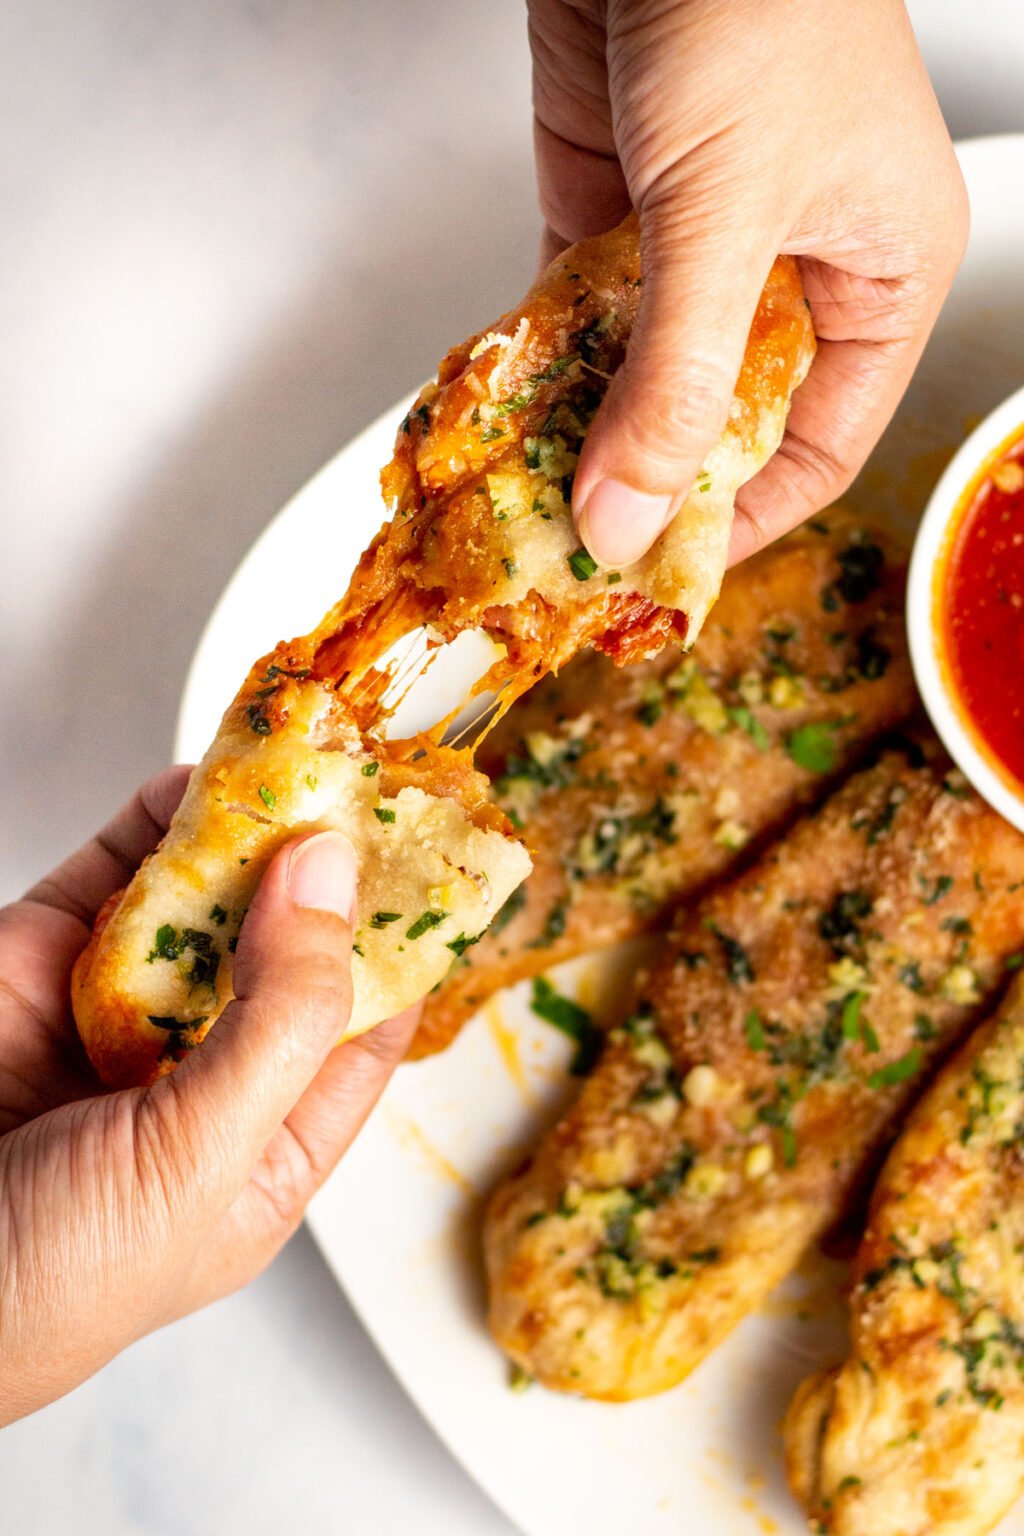 Cheesy Pepperoni Pizza Sticks with Parmesan - Game Day Recipe